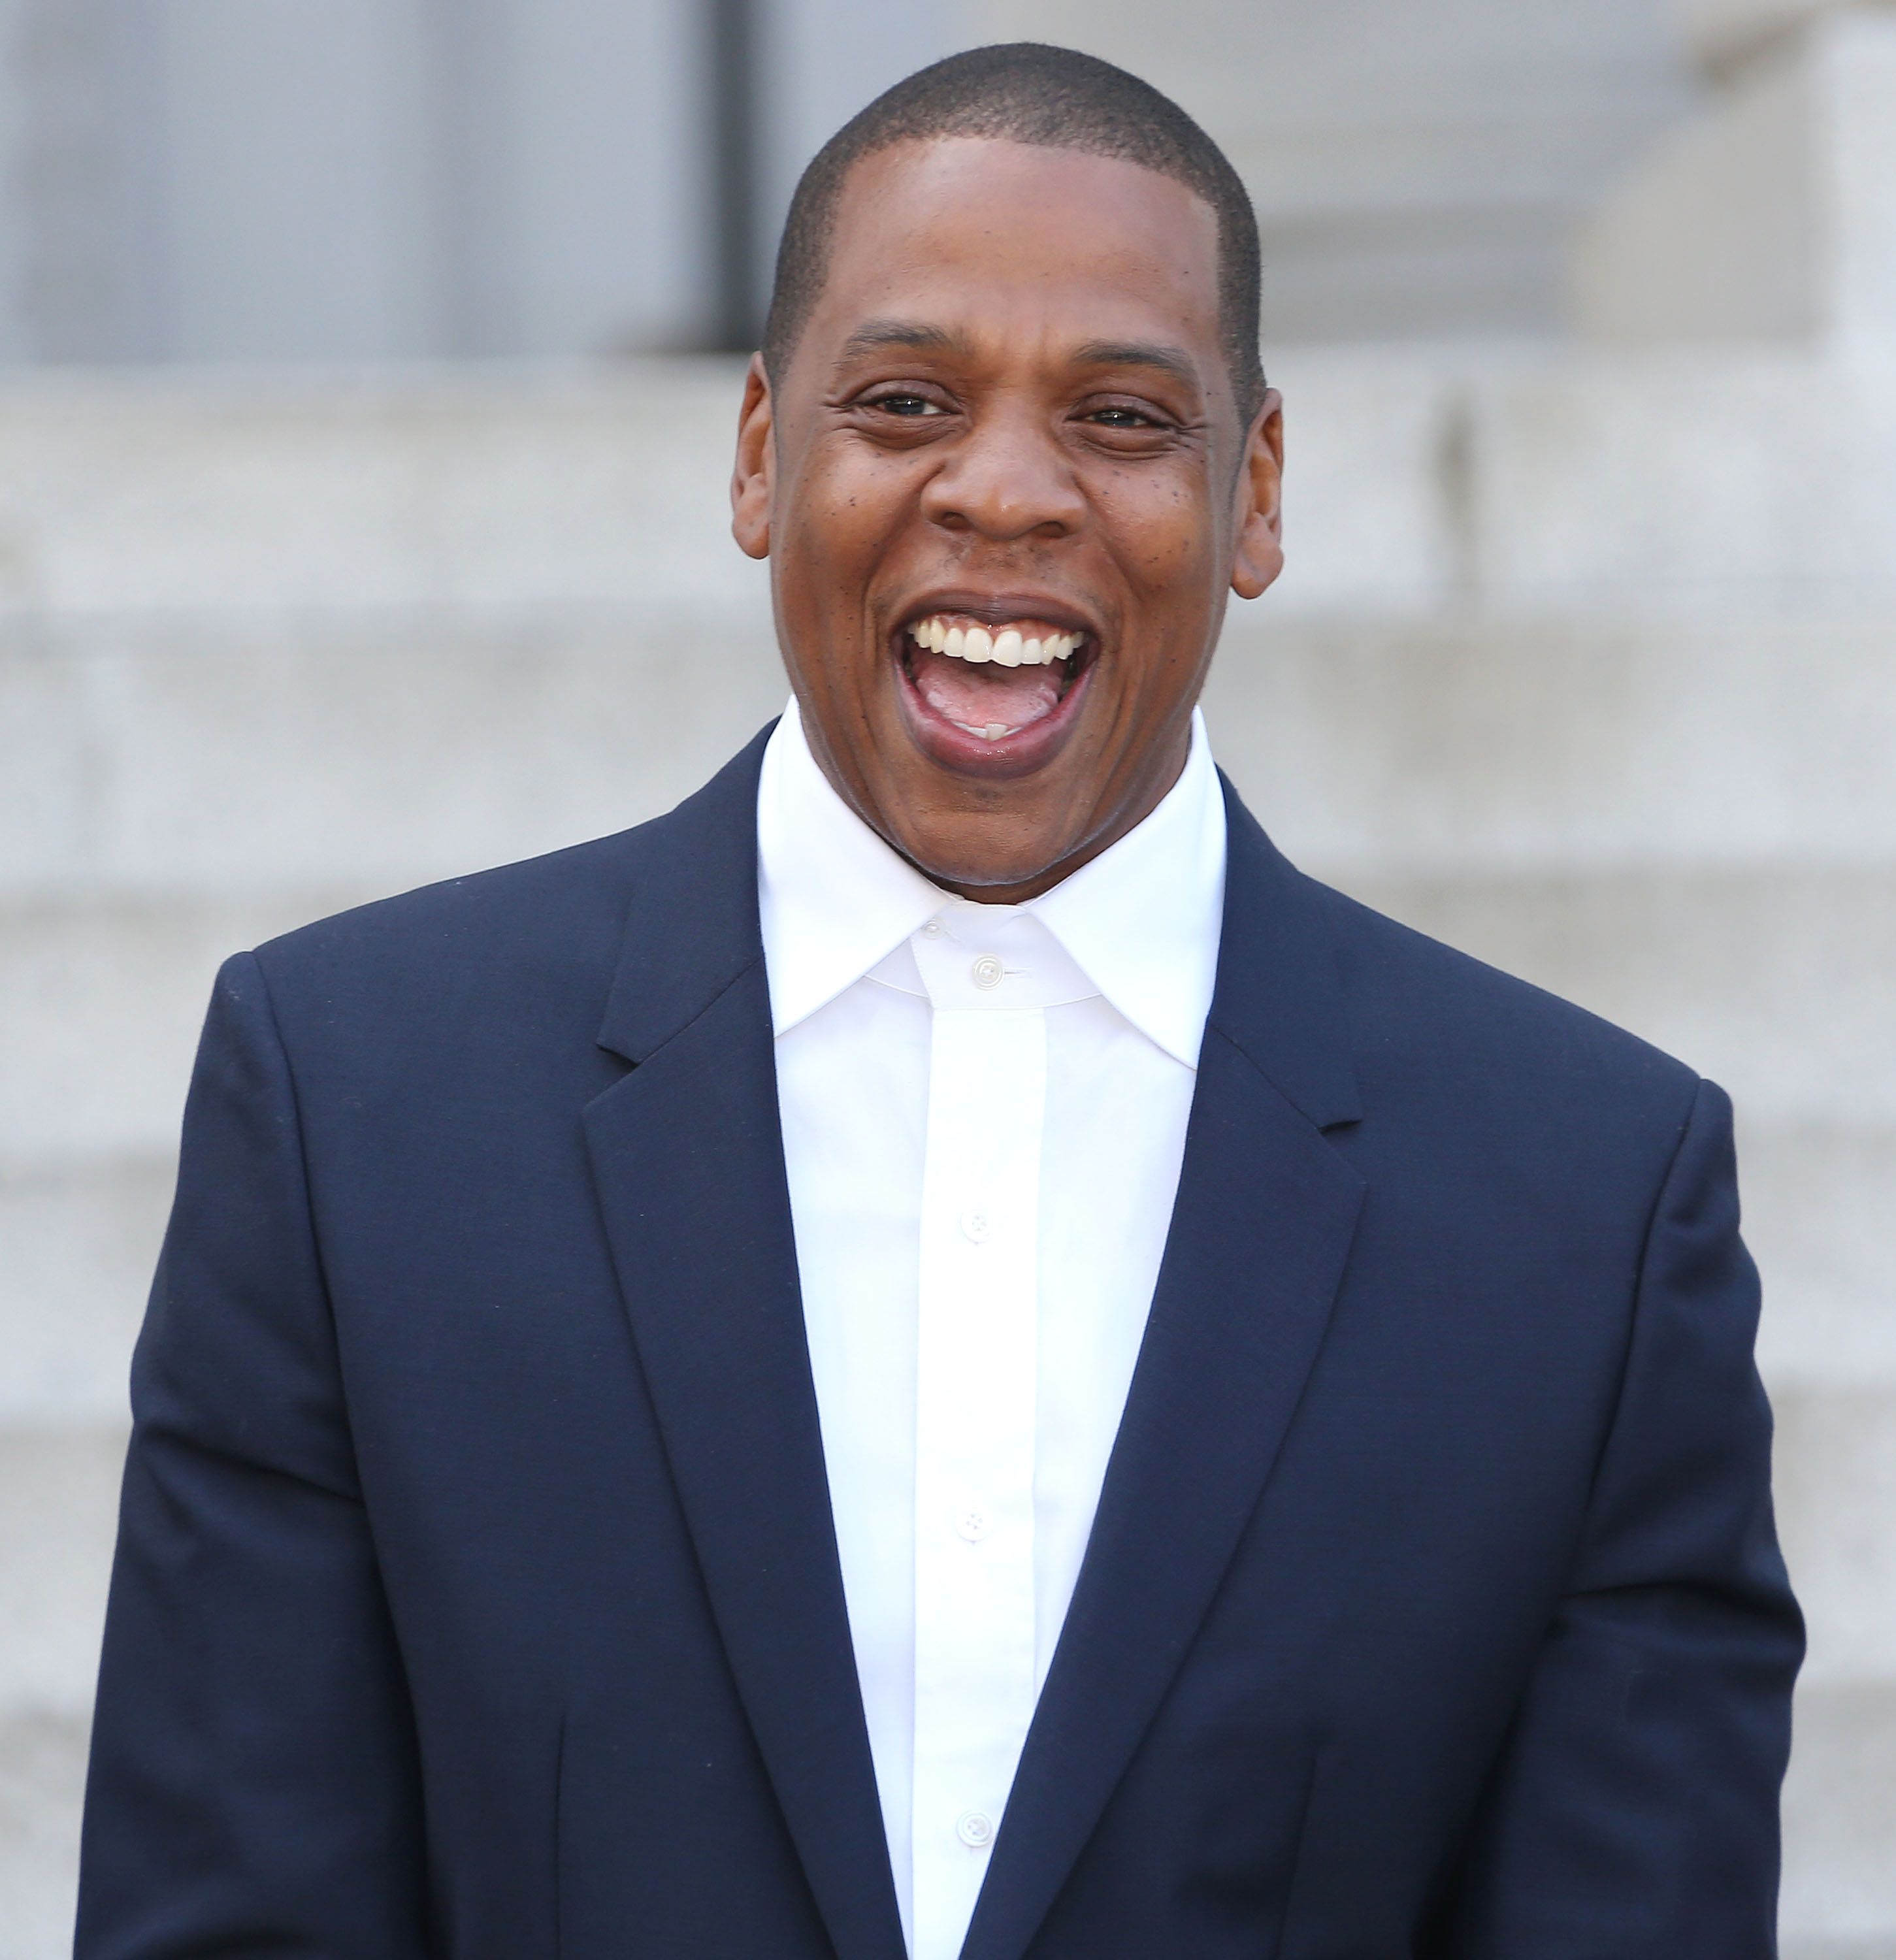 Jay-Z's Net Worth Is Based on Music, Businesses, and Investments